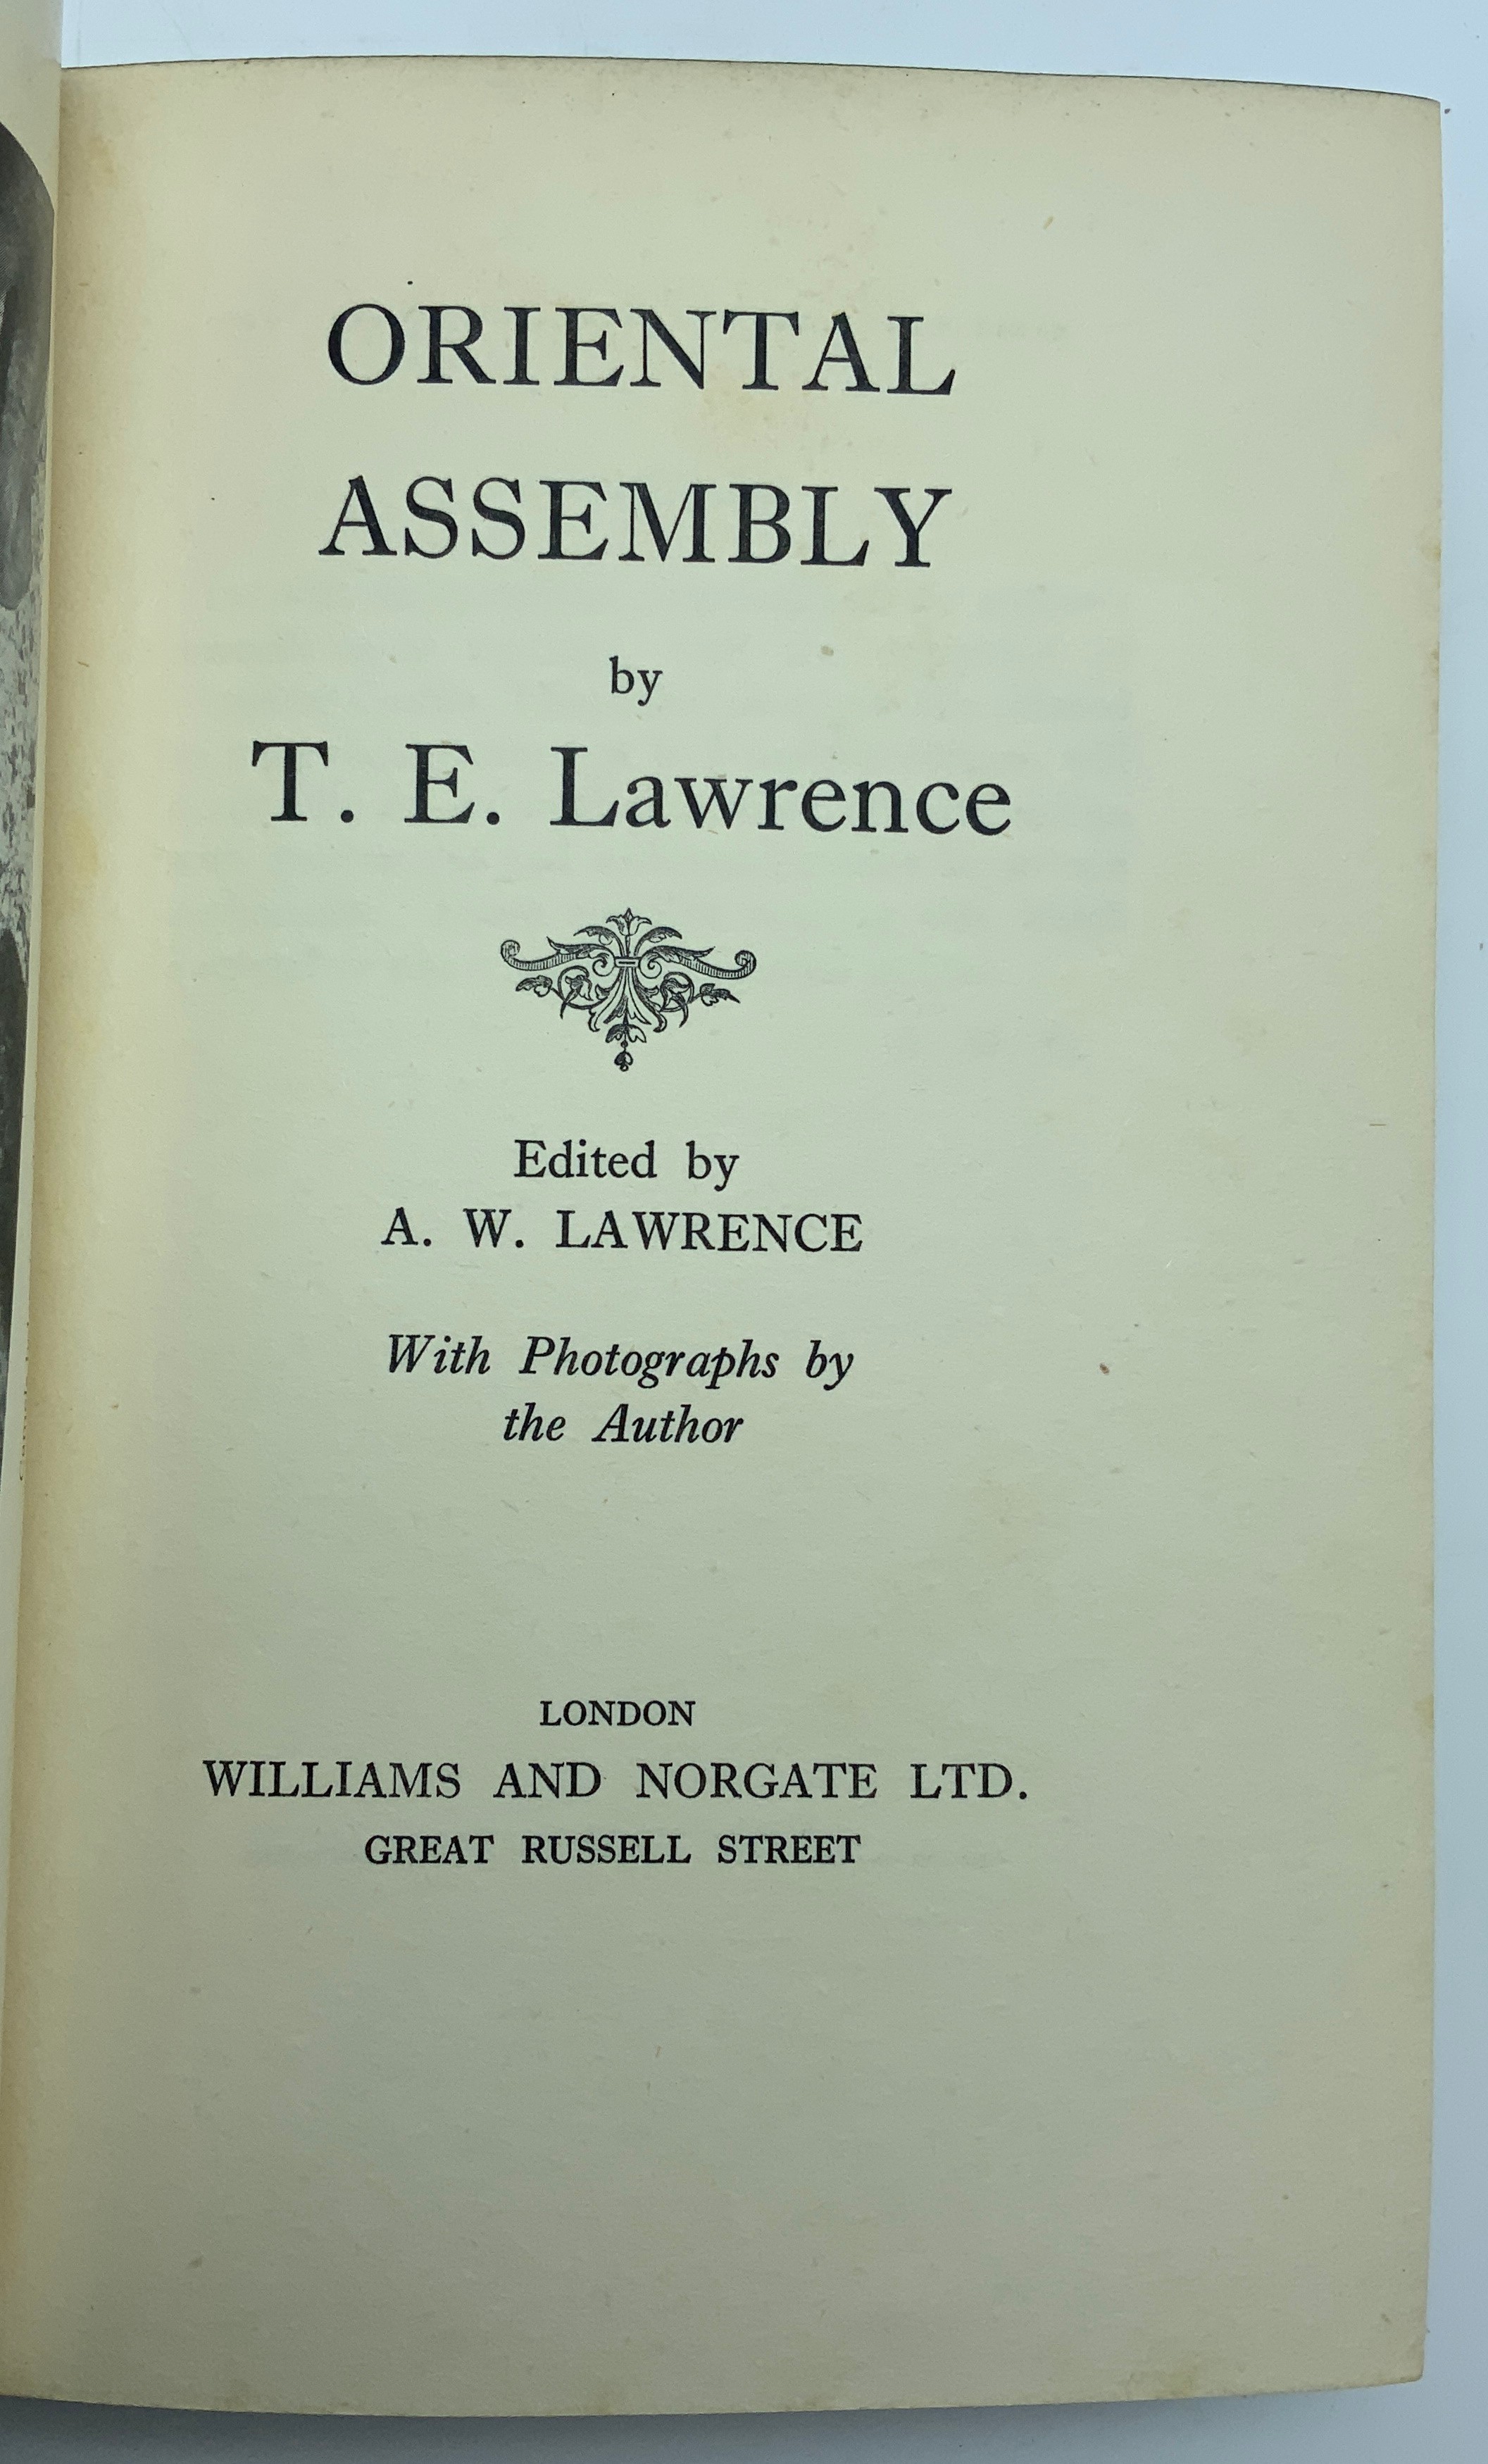 1939 ORIENTAL ASSEMBLY BY T.E. LAWRENCE PUBLISHED BY WILLIAMS AND NORGATE LTD LONDON - Image 4 of 10